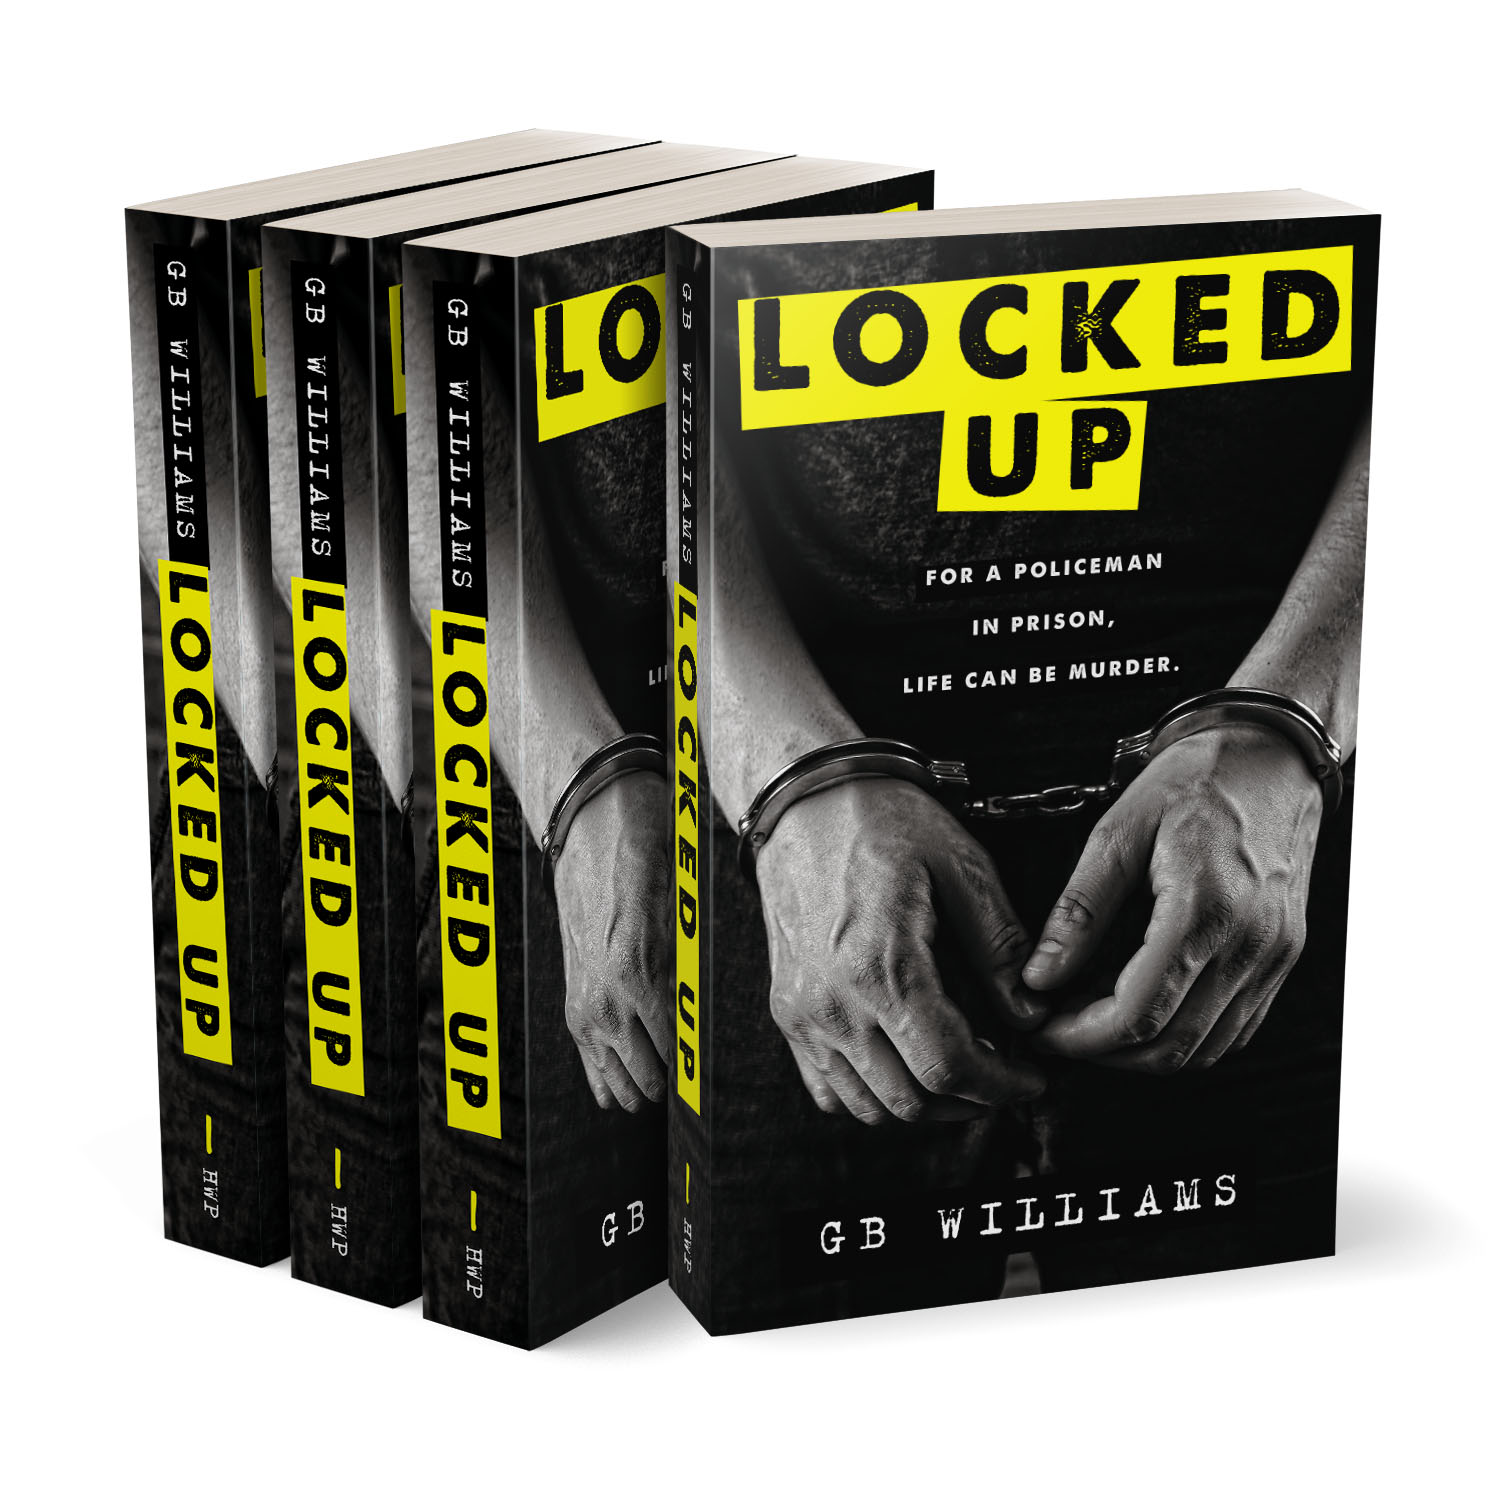 The 'Locked' Trilogy is a gritty British crime thriller series. The author is G.B. Williams. The book covers and boxset were designed by Mark Thomas of coverness.com. To find out more about my book design services, please visit www.coverness.com